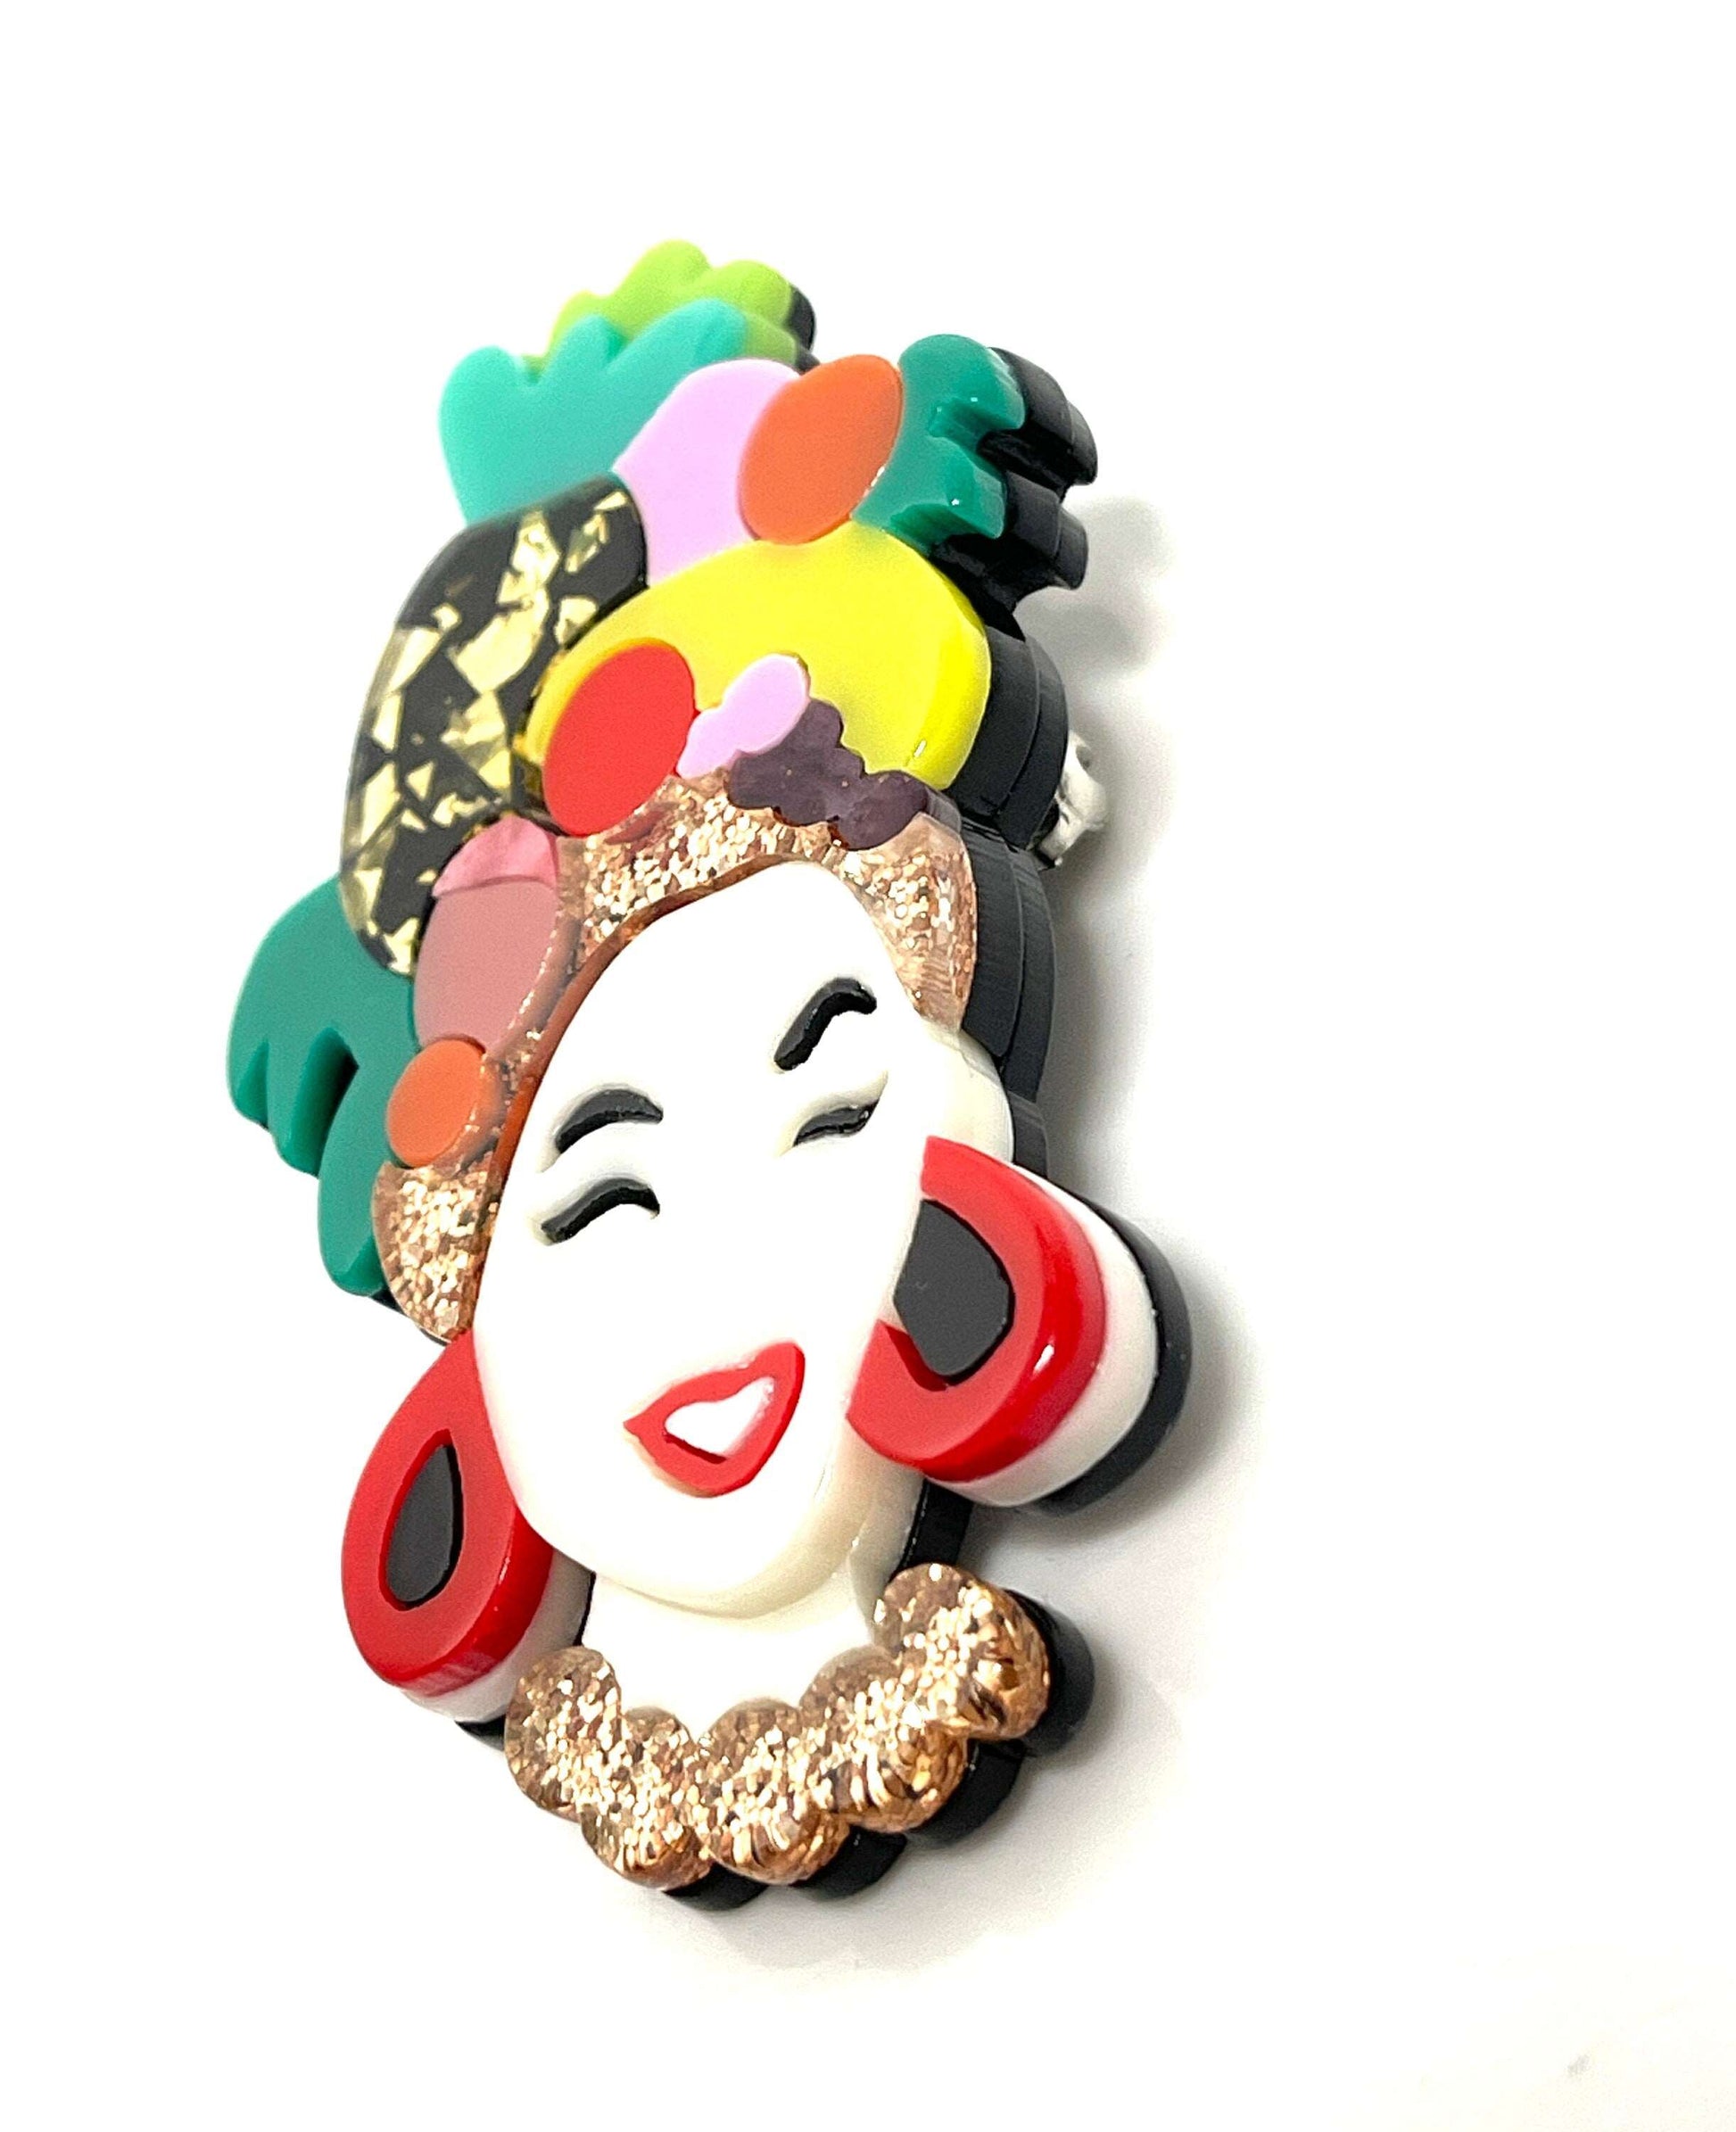 Lady with Tutti Fruiti HeadDress Brooch, Carribean Film Star Style, Fashion Pin for Jacket Scarf, Large Brooch, Brooches For Women